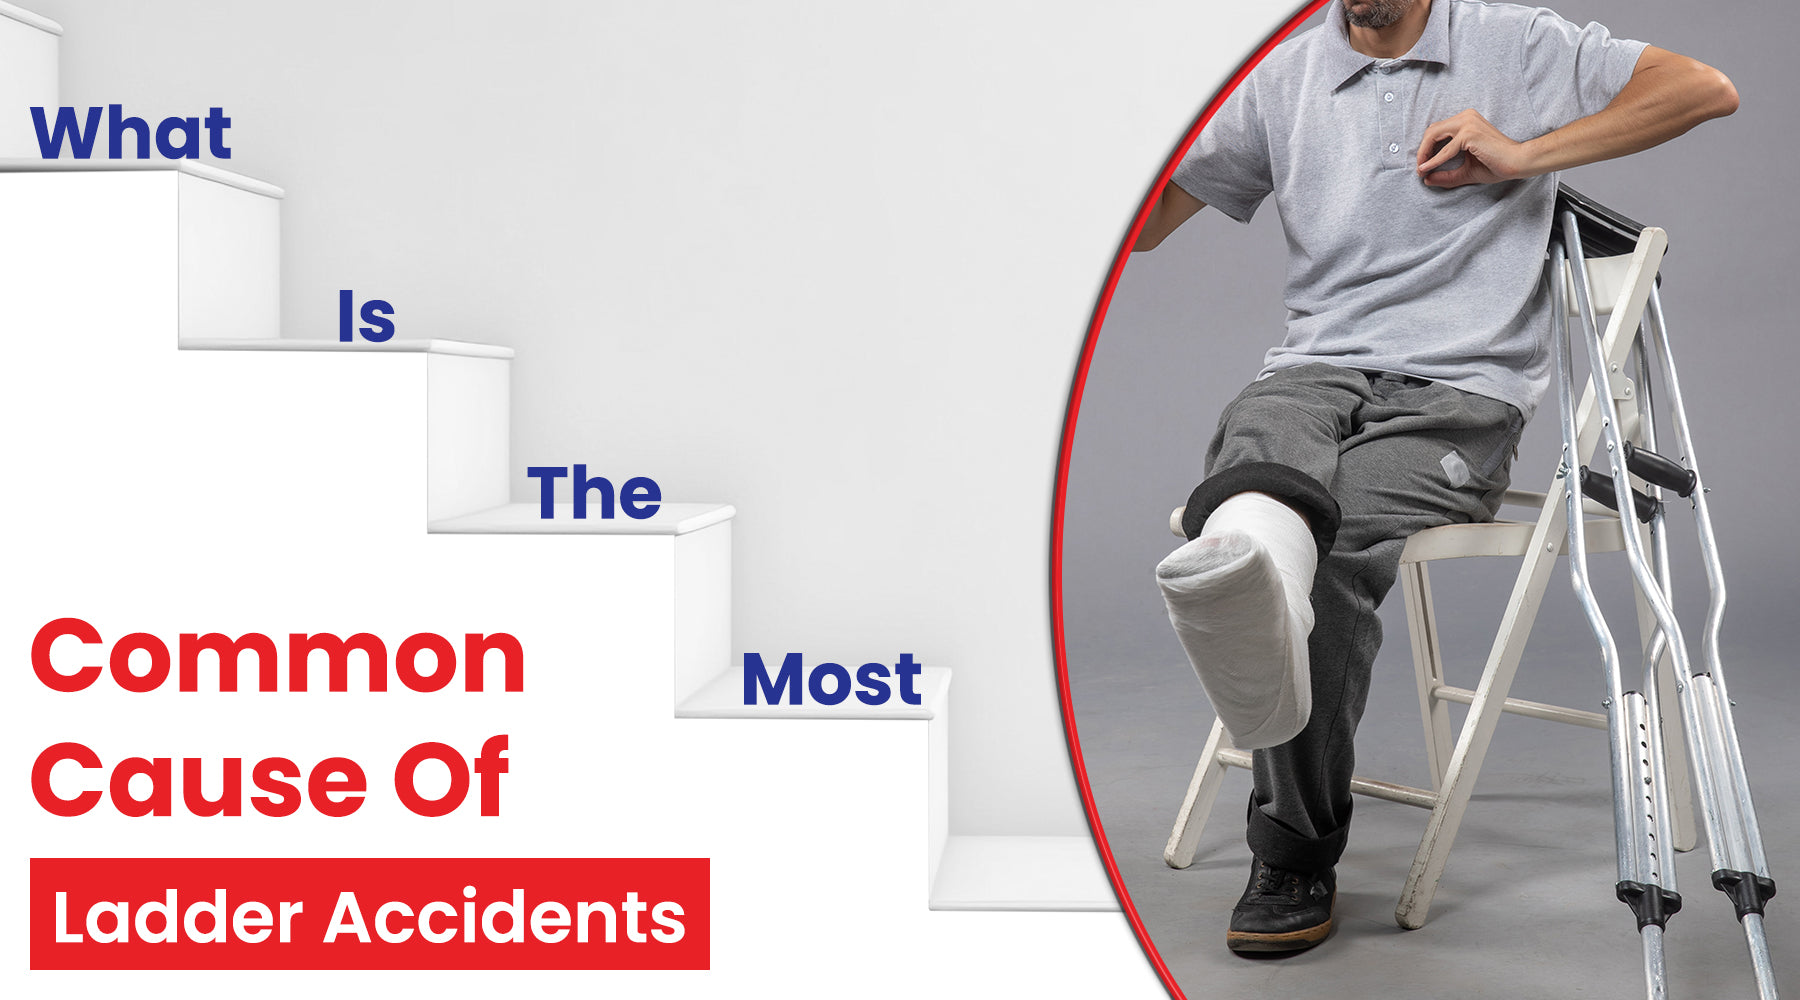 What is the Most Common Cause of Ladder Accidents?